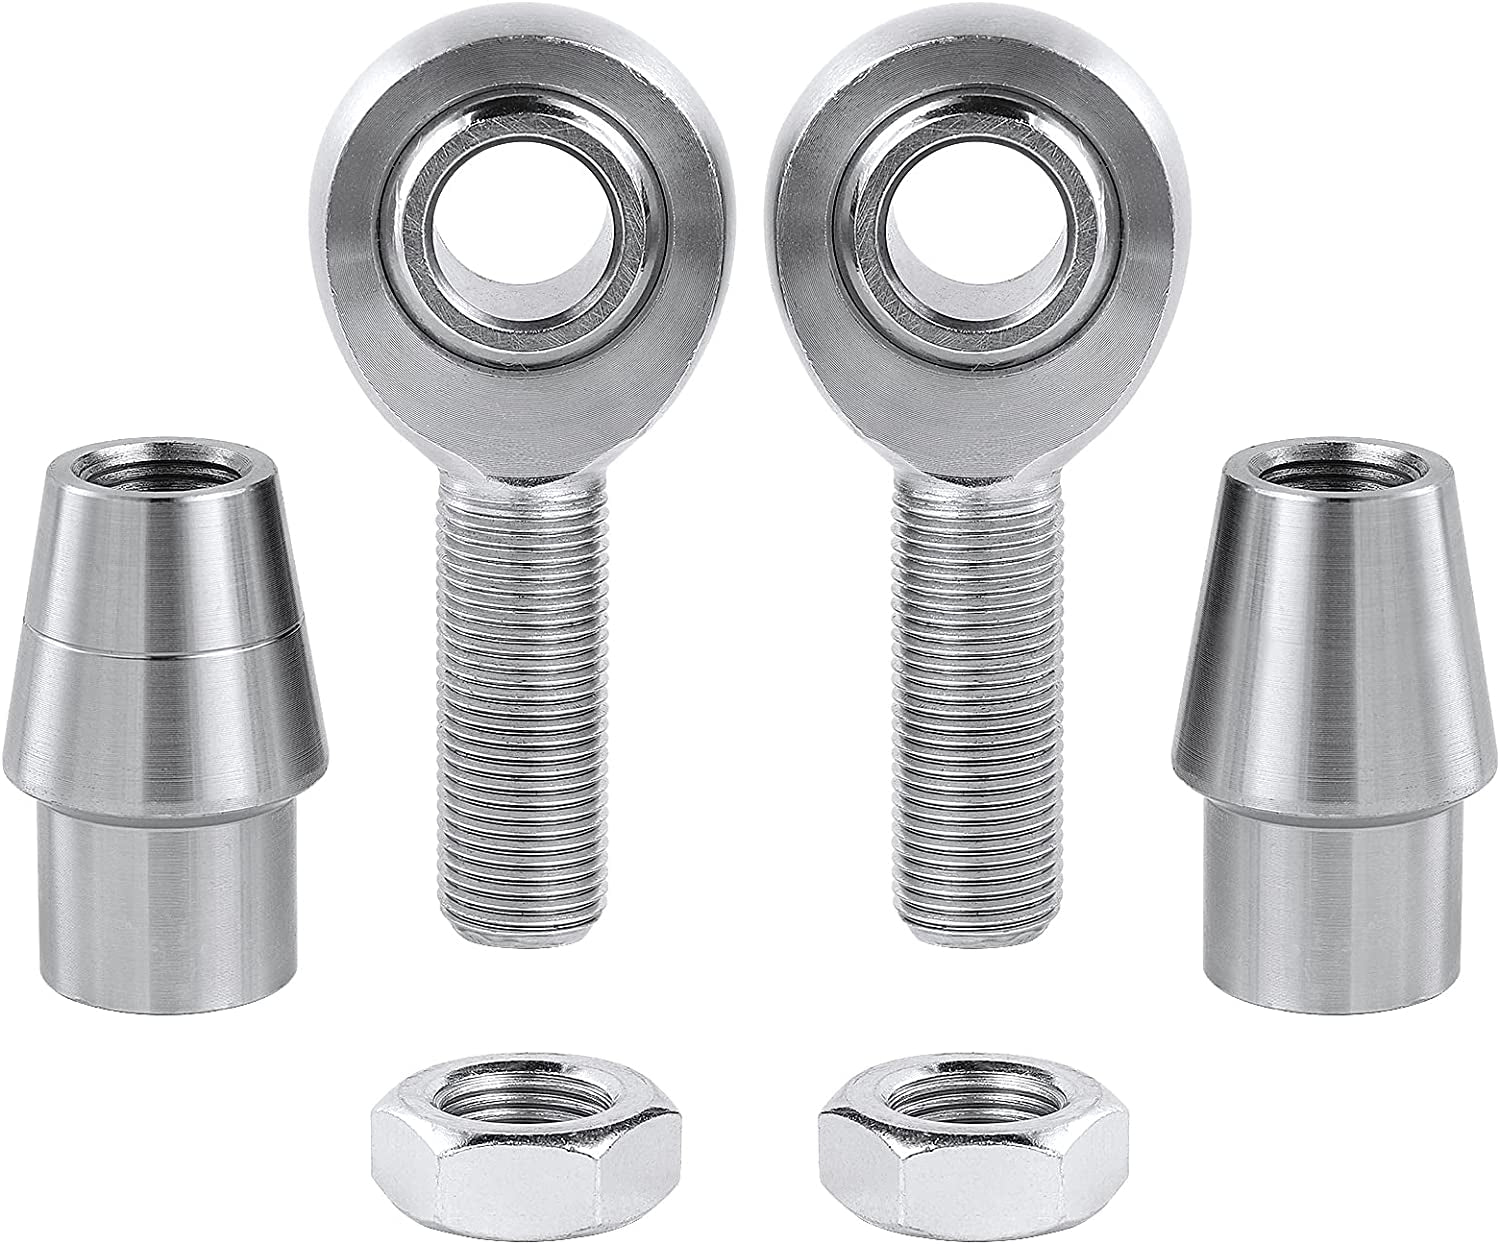 5/8” Heim Joints Rod End Kit,.625" Chromoly Heim Joints Panhard Rod End Kit for Steering,Suspension, Traction Bars, Right&Left Hand Thread Steering Joints with Tube Adapters & Jam Nuts - 2Set